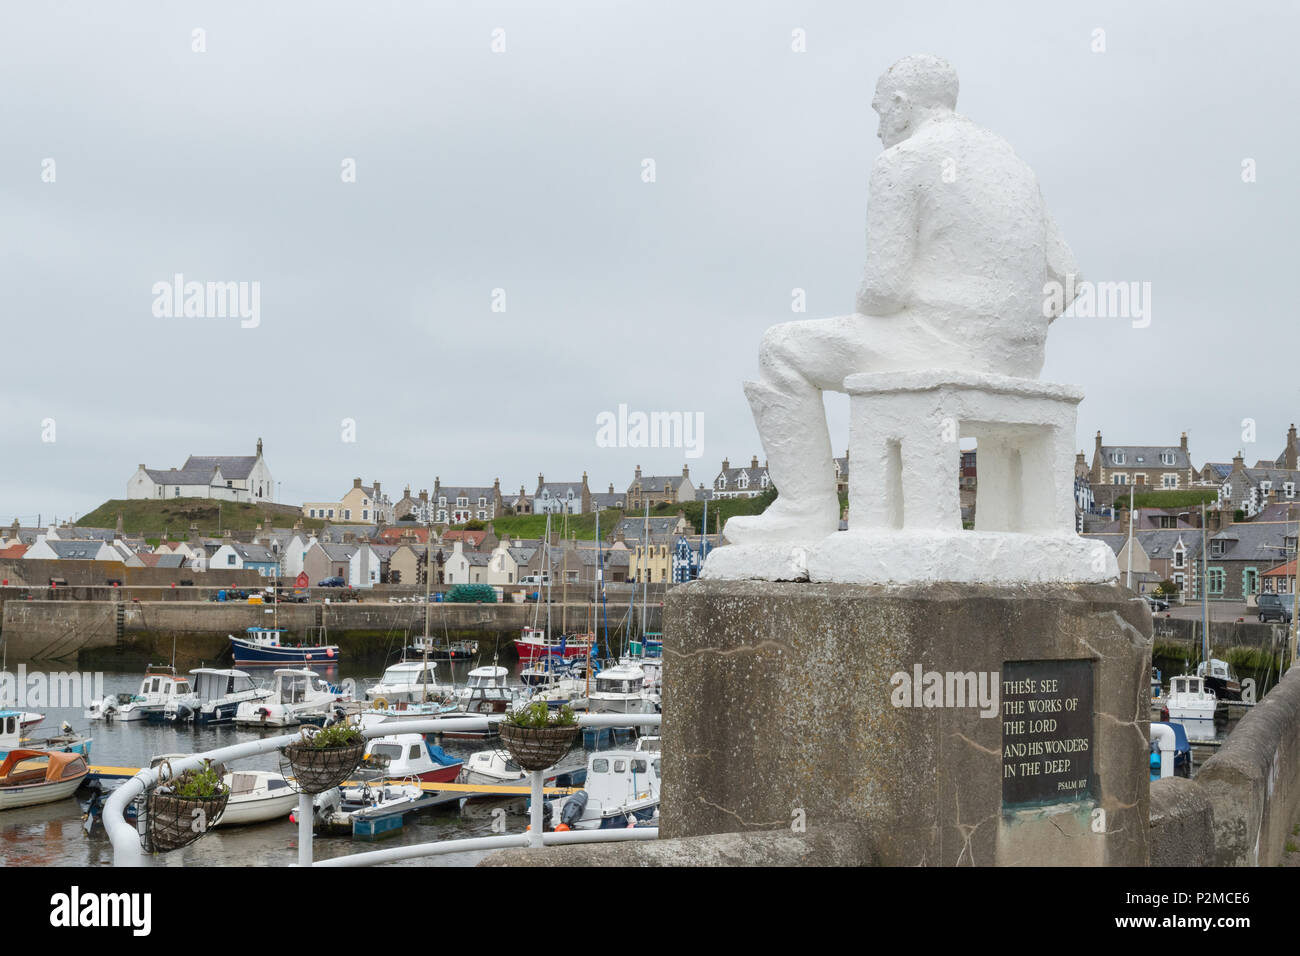 Fnidochty harbour, Moray, Scotland, UK - overlooked by The White Mannie - a statue of a seated fisherman created in 1959 by local artist Correna Cowie Stock Photo